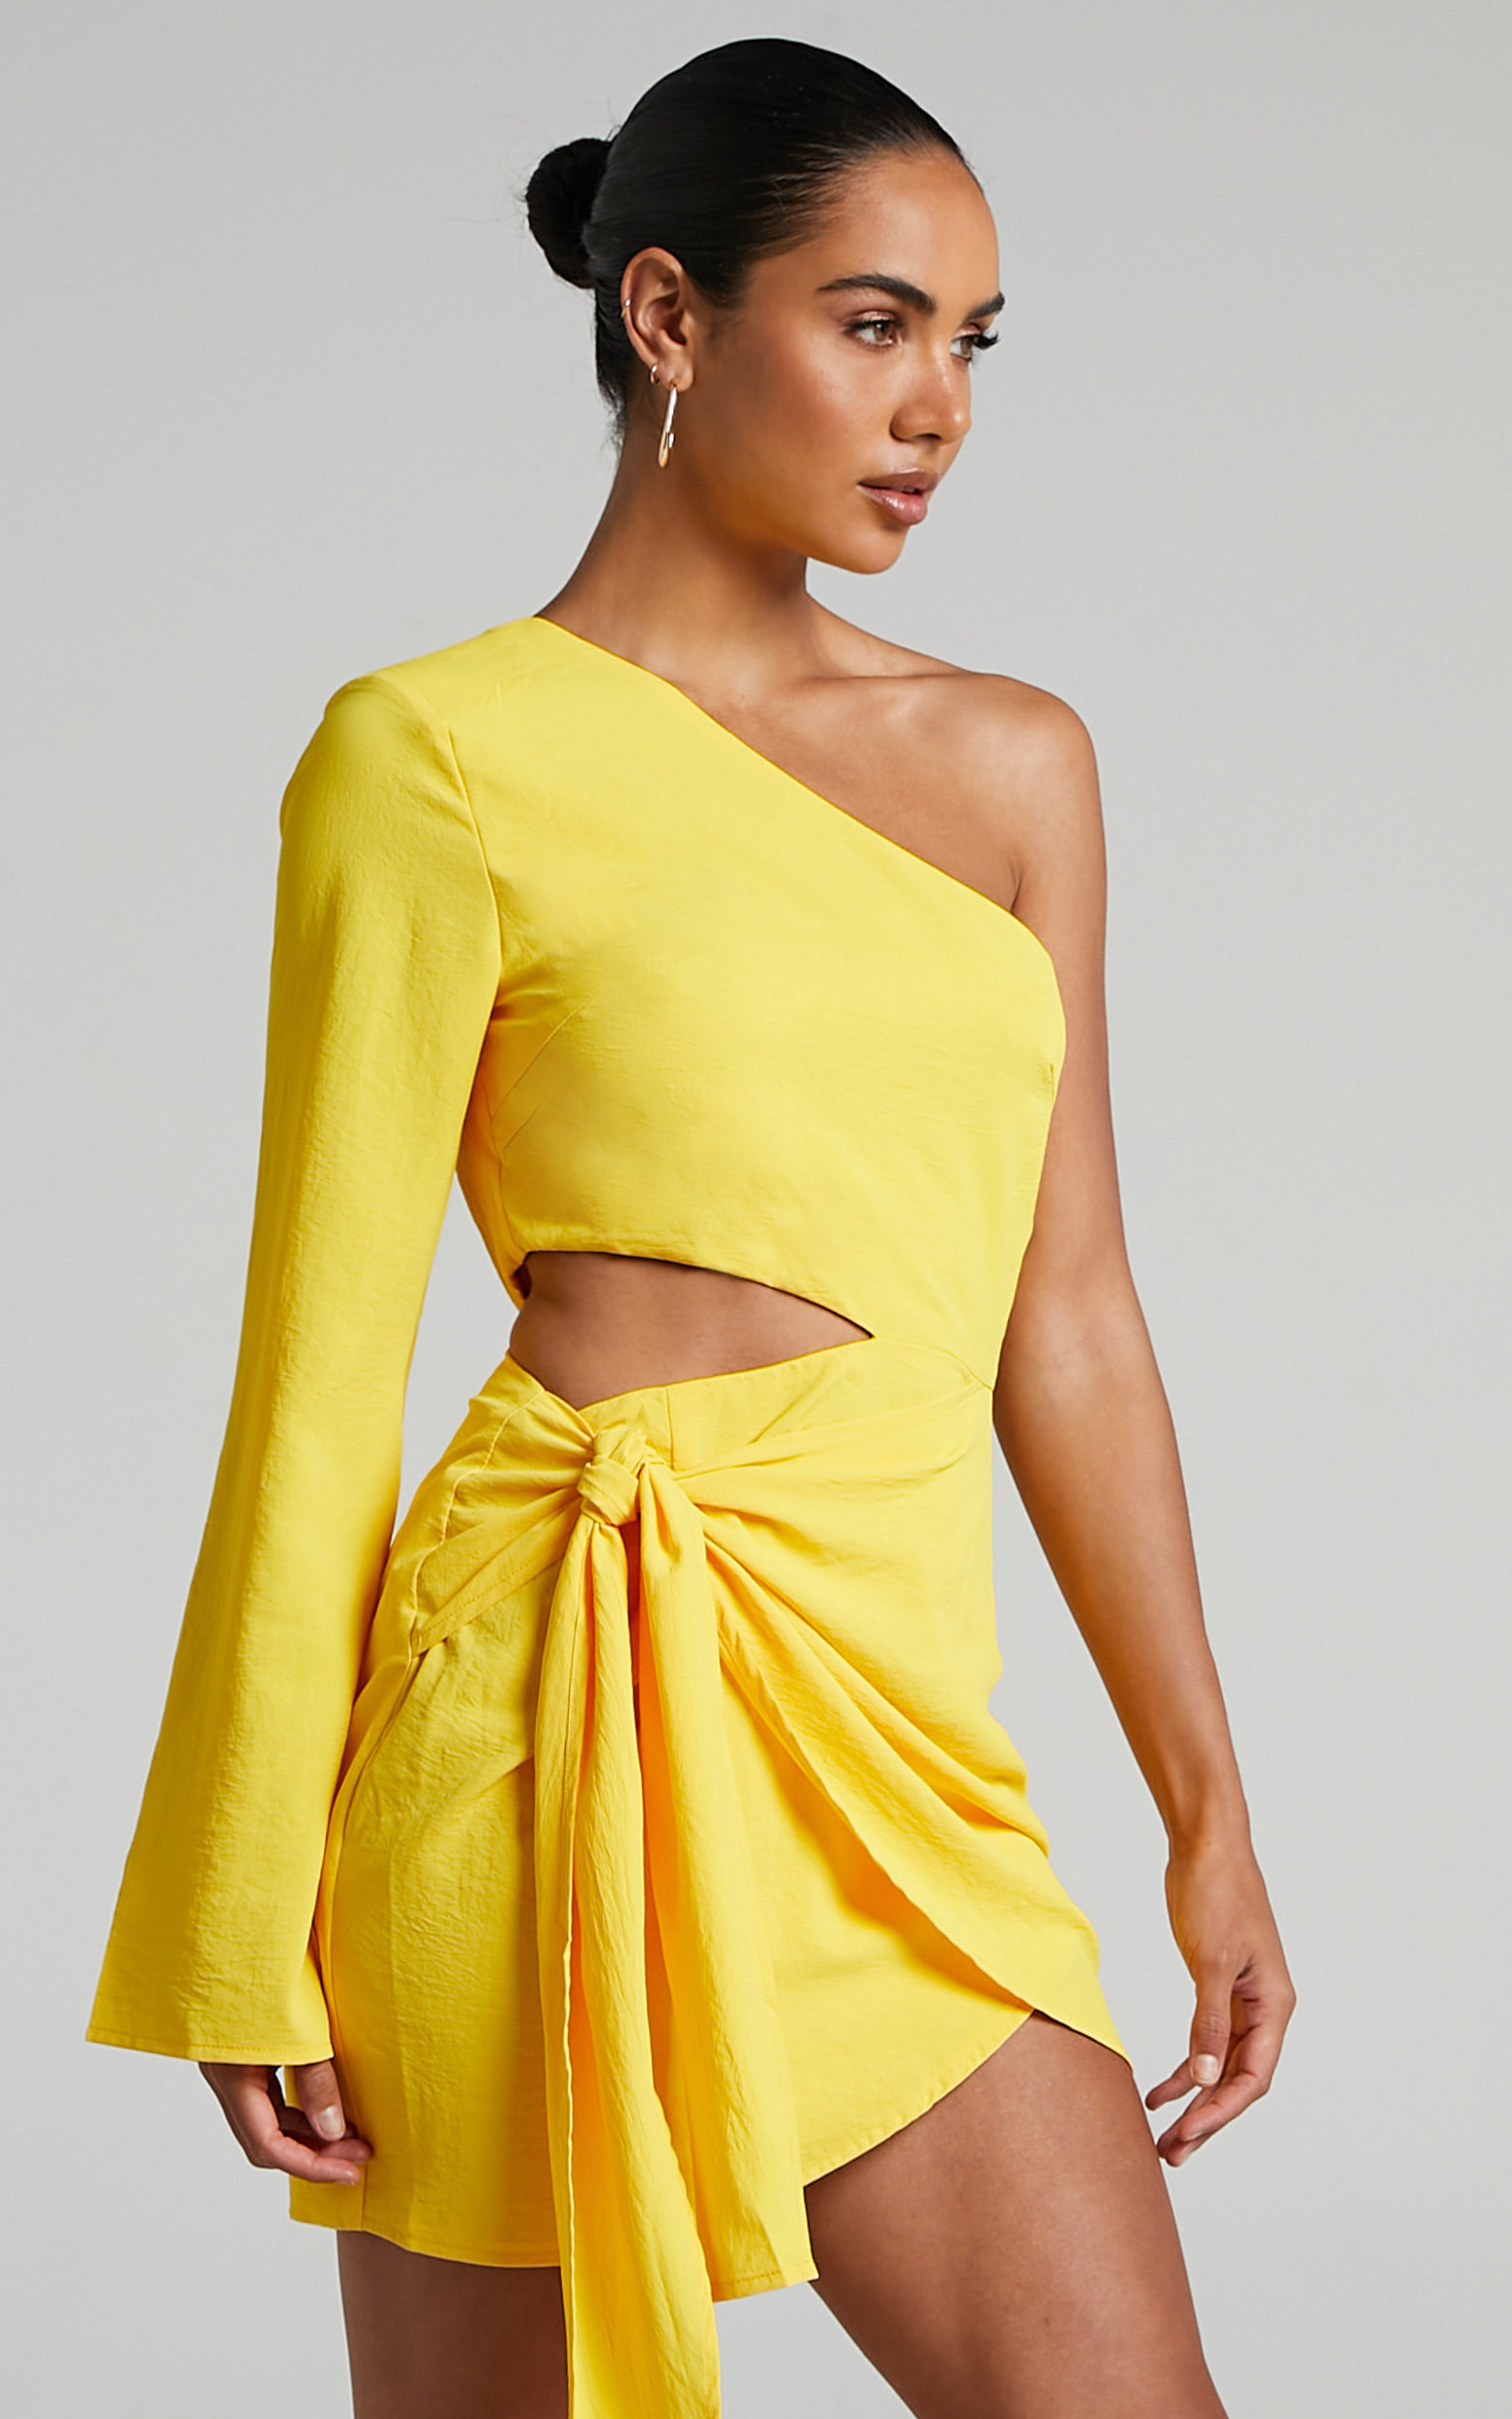 RUNAWAY THE LABEL - AVA DRESS in Yellow - L, YEL1, hi-res image number null